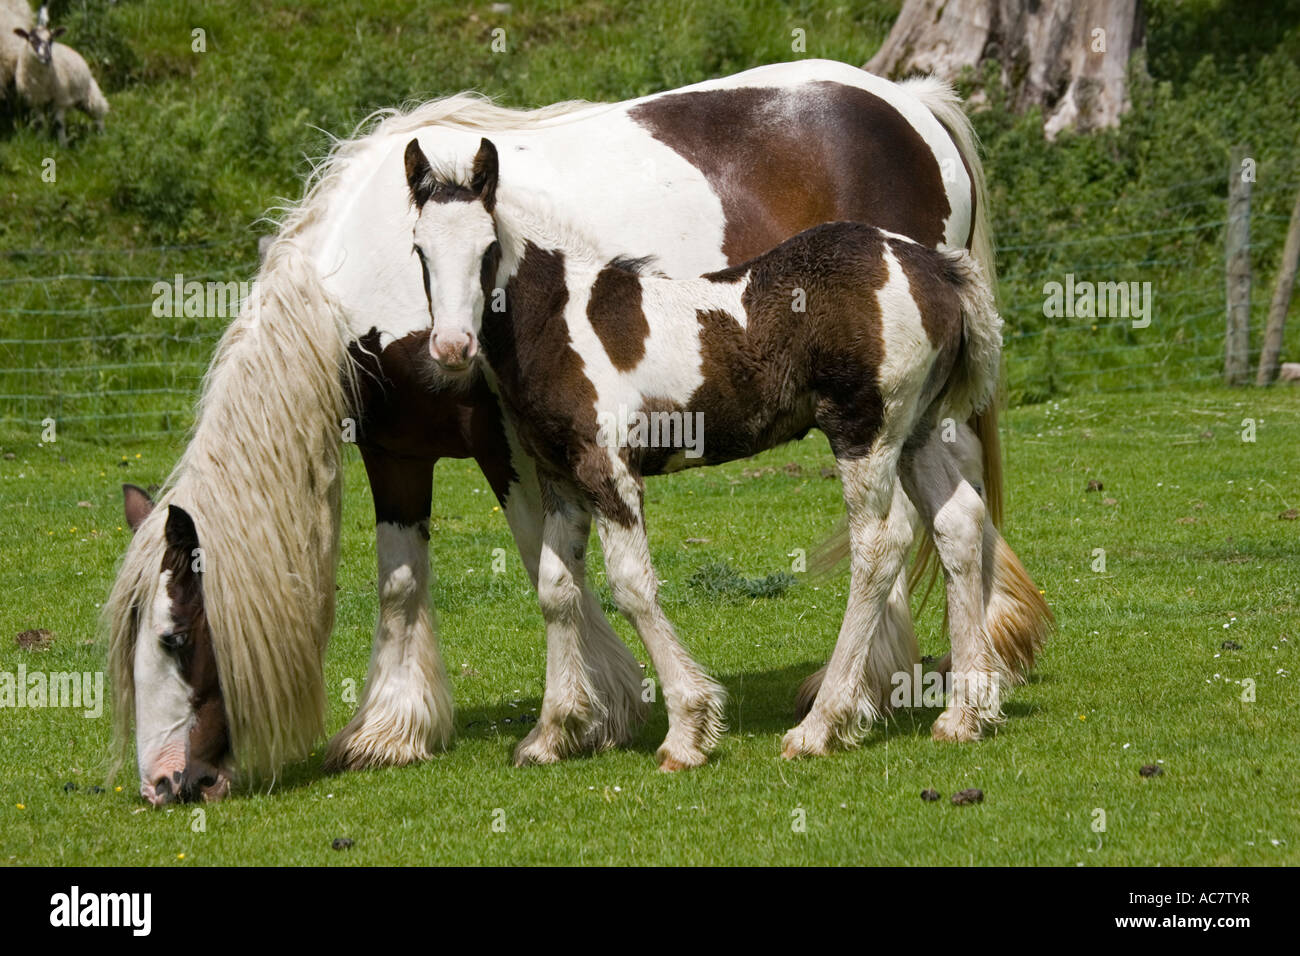 Brown and white skewbald horse grazing with young foal North Yorkshire Moors UK Stock Photo